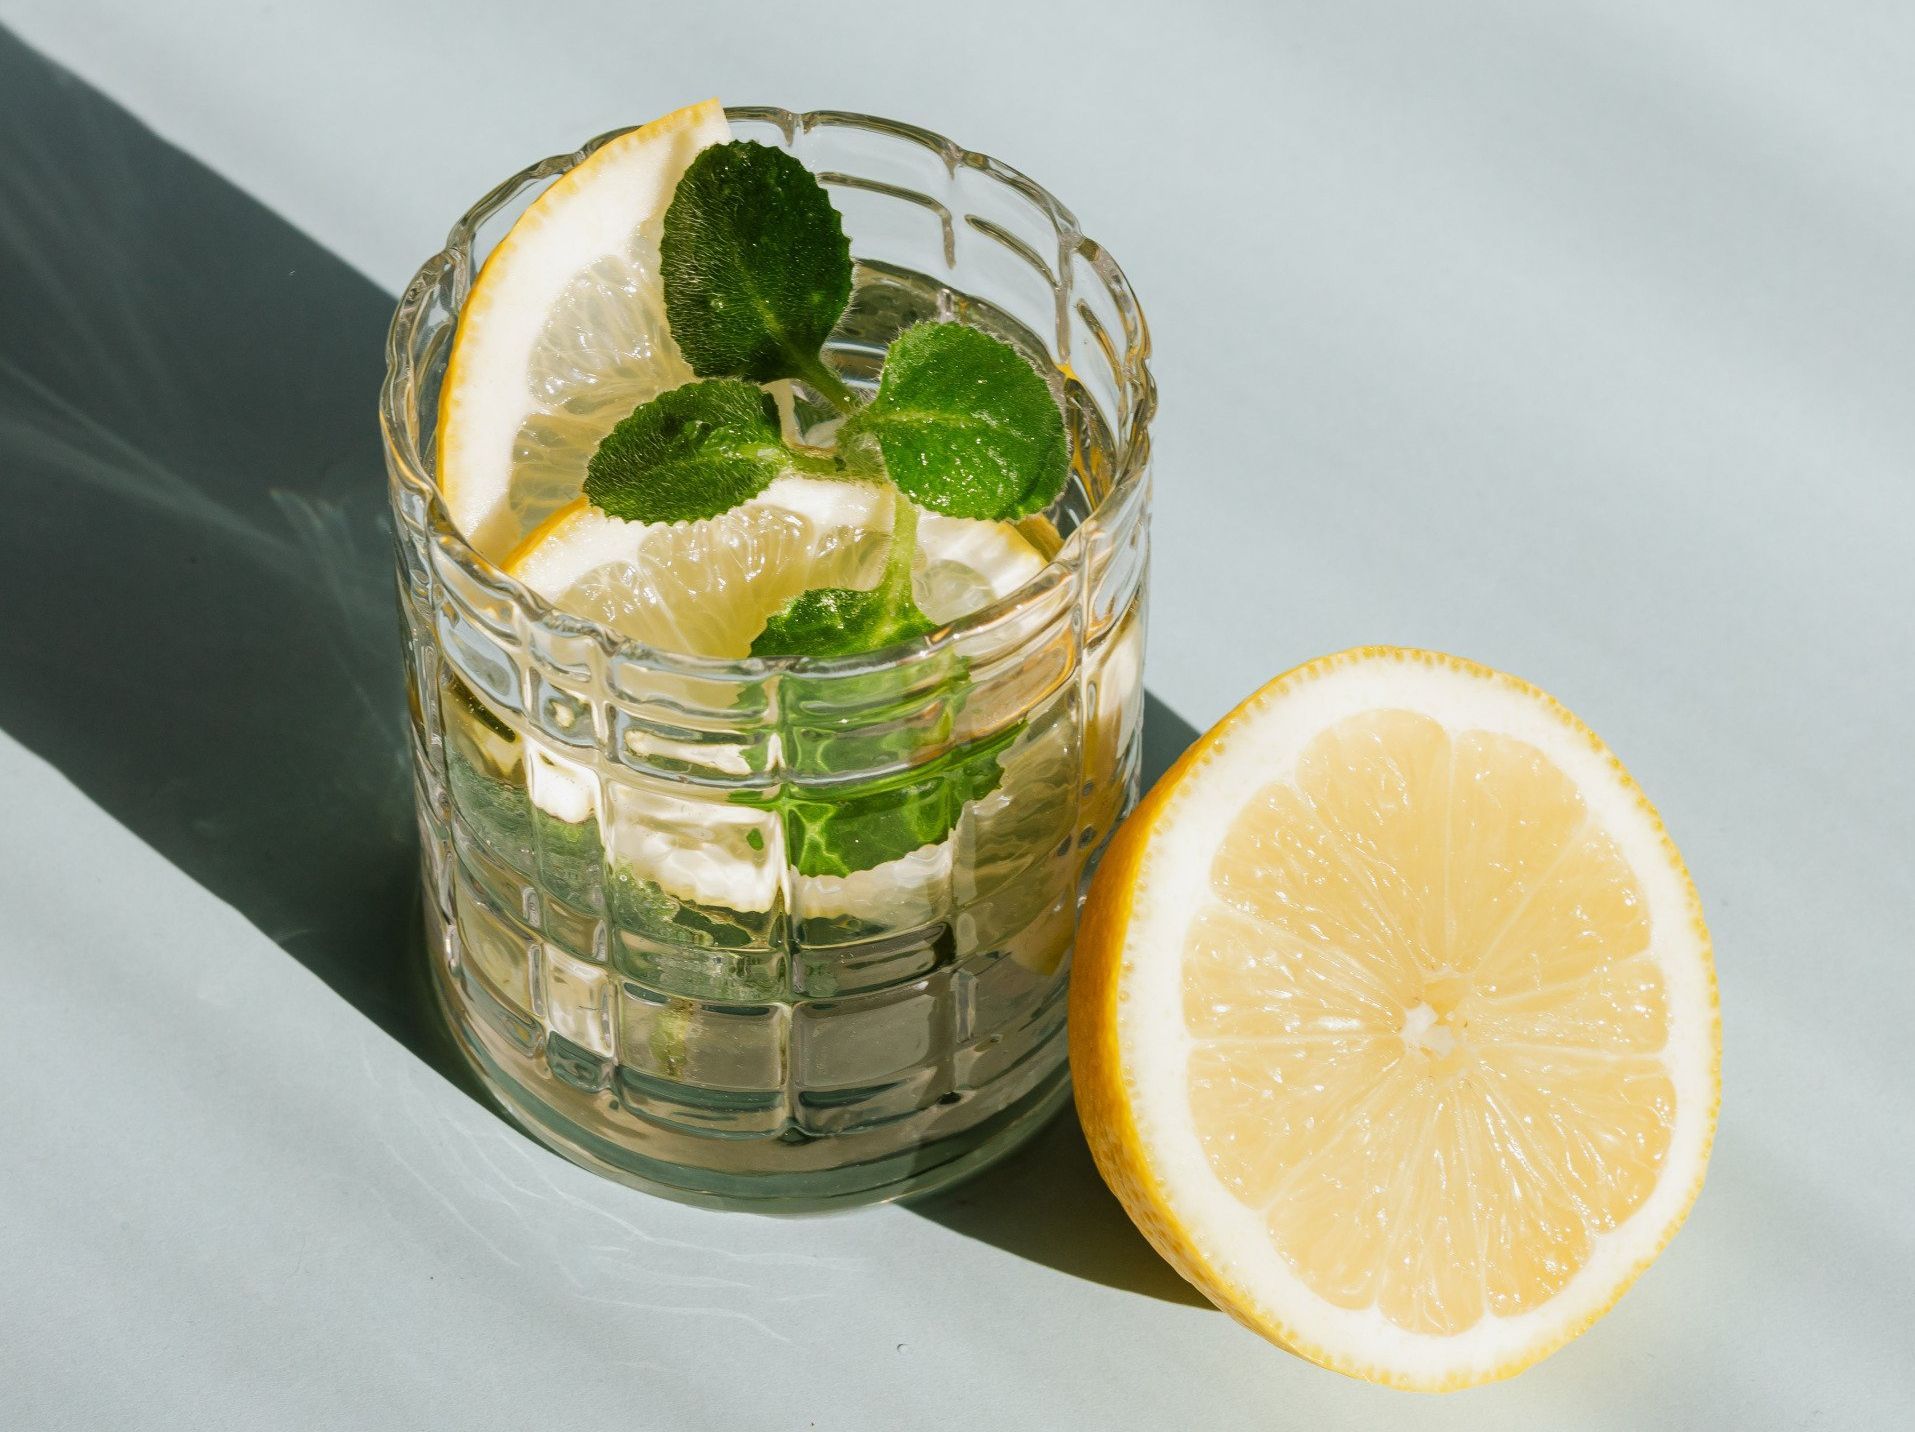 A glass of water with lemon slices and mint leaves next to a slice of lemon.